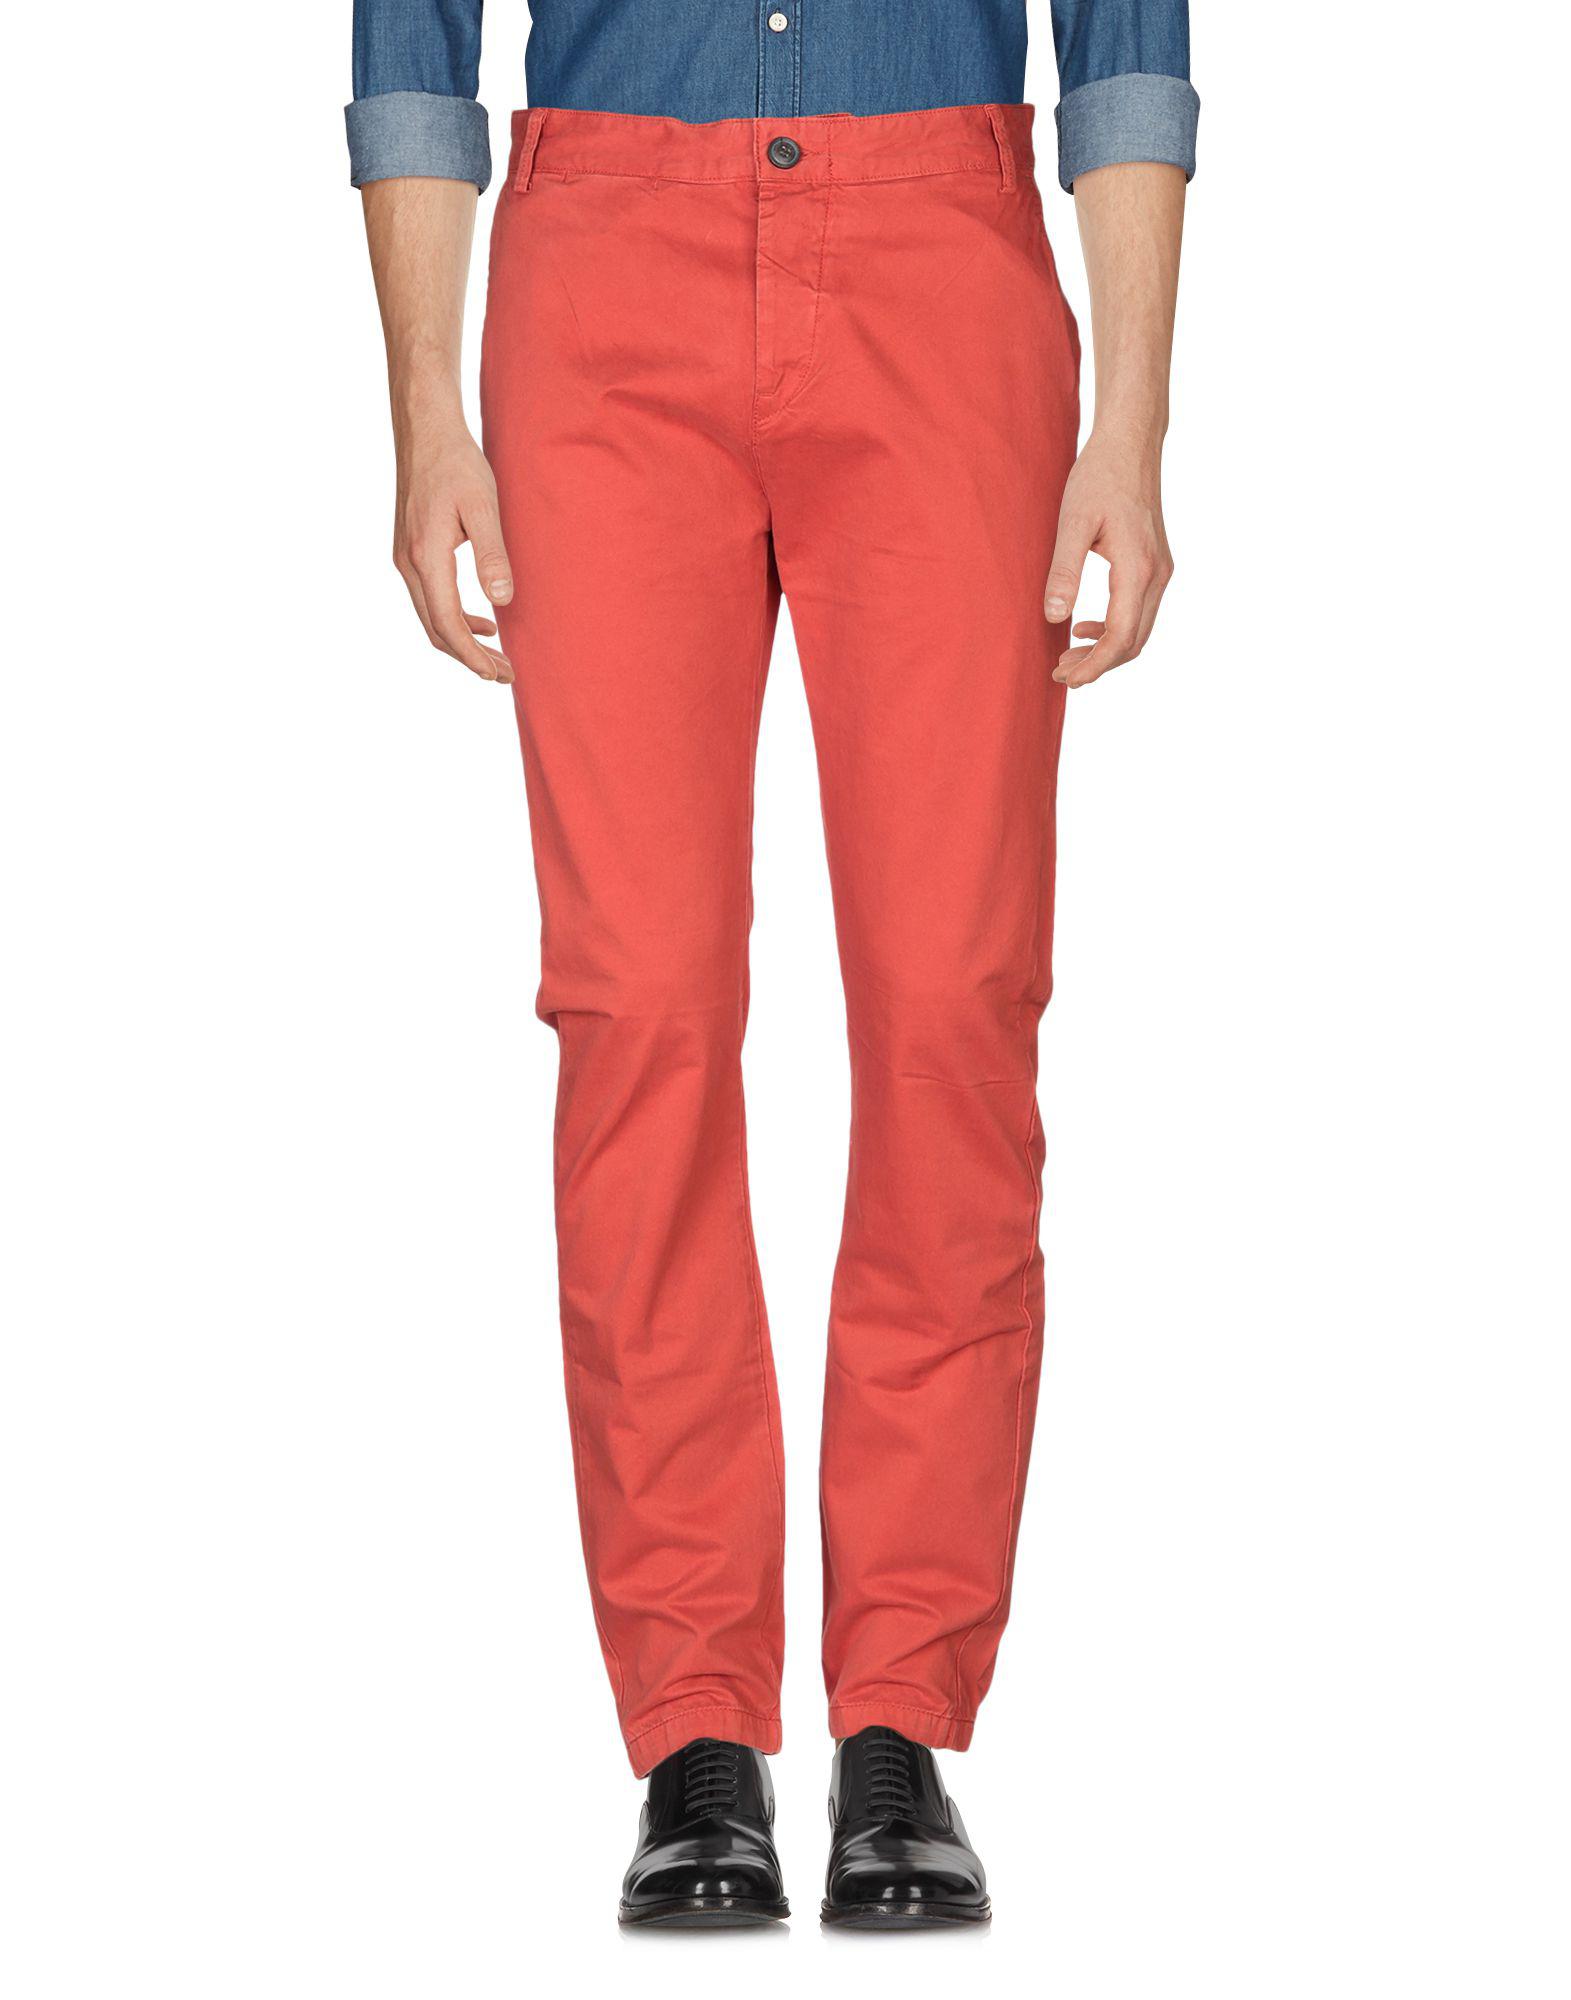 SELECTED Cotton Casual Pants in Rust (Red) for Men - Lyst